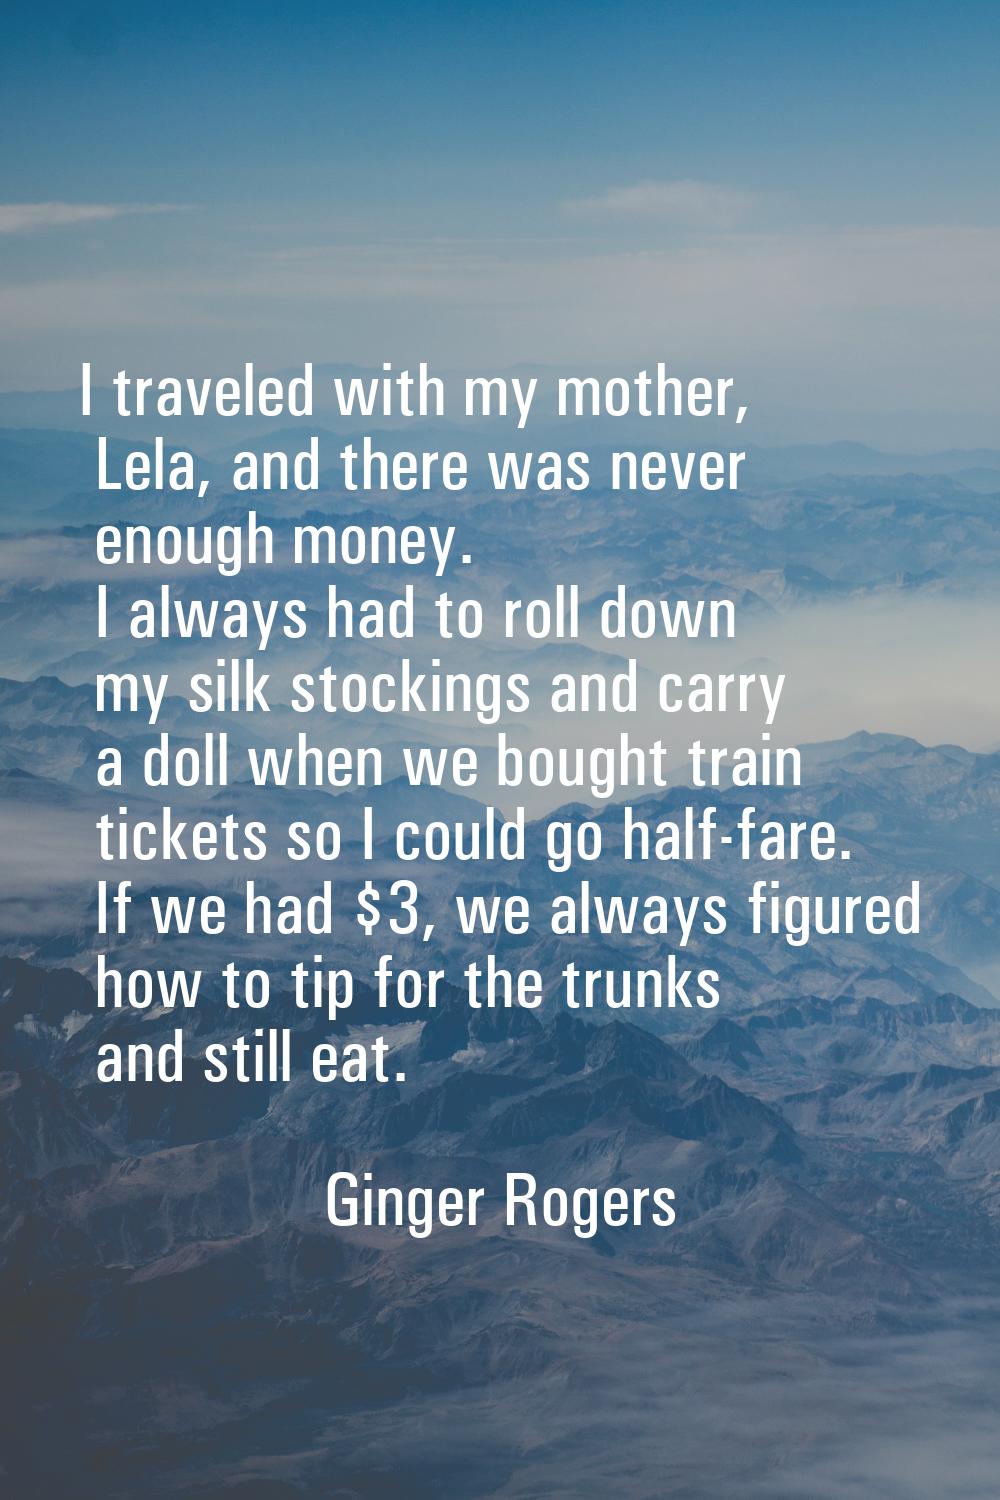 I traveled with my mother, Lela, and there was never enough money. I always had to roll down my sil